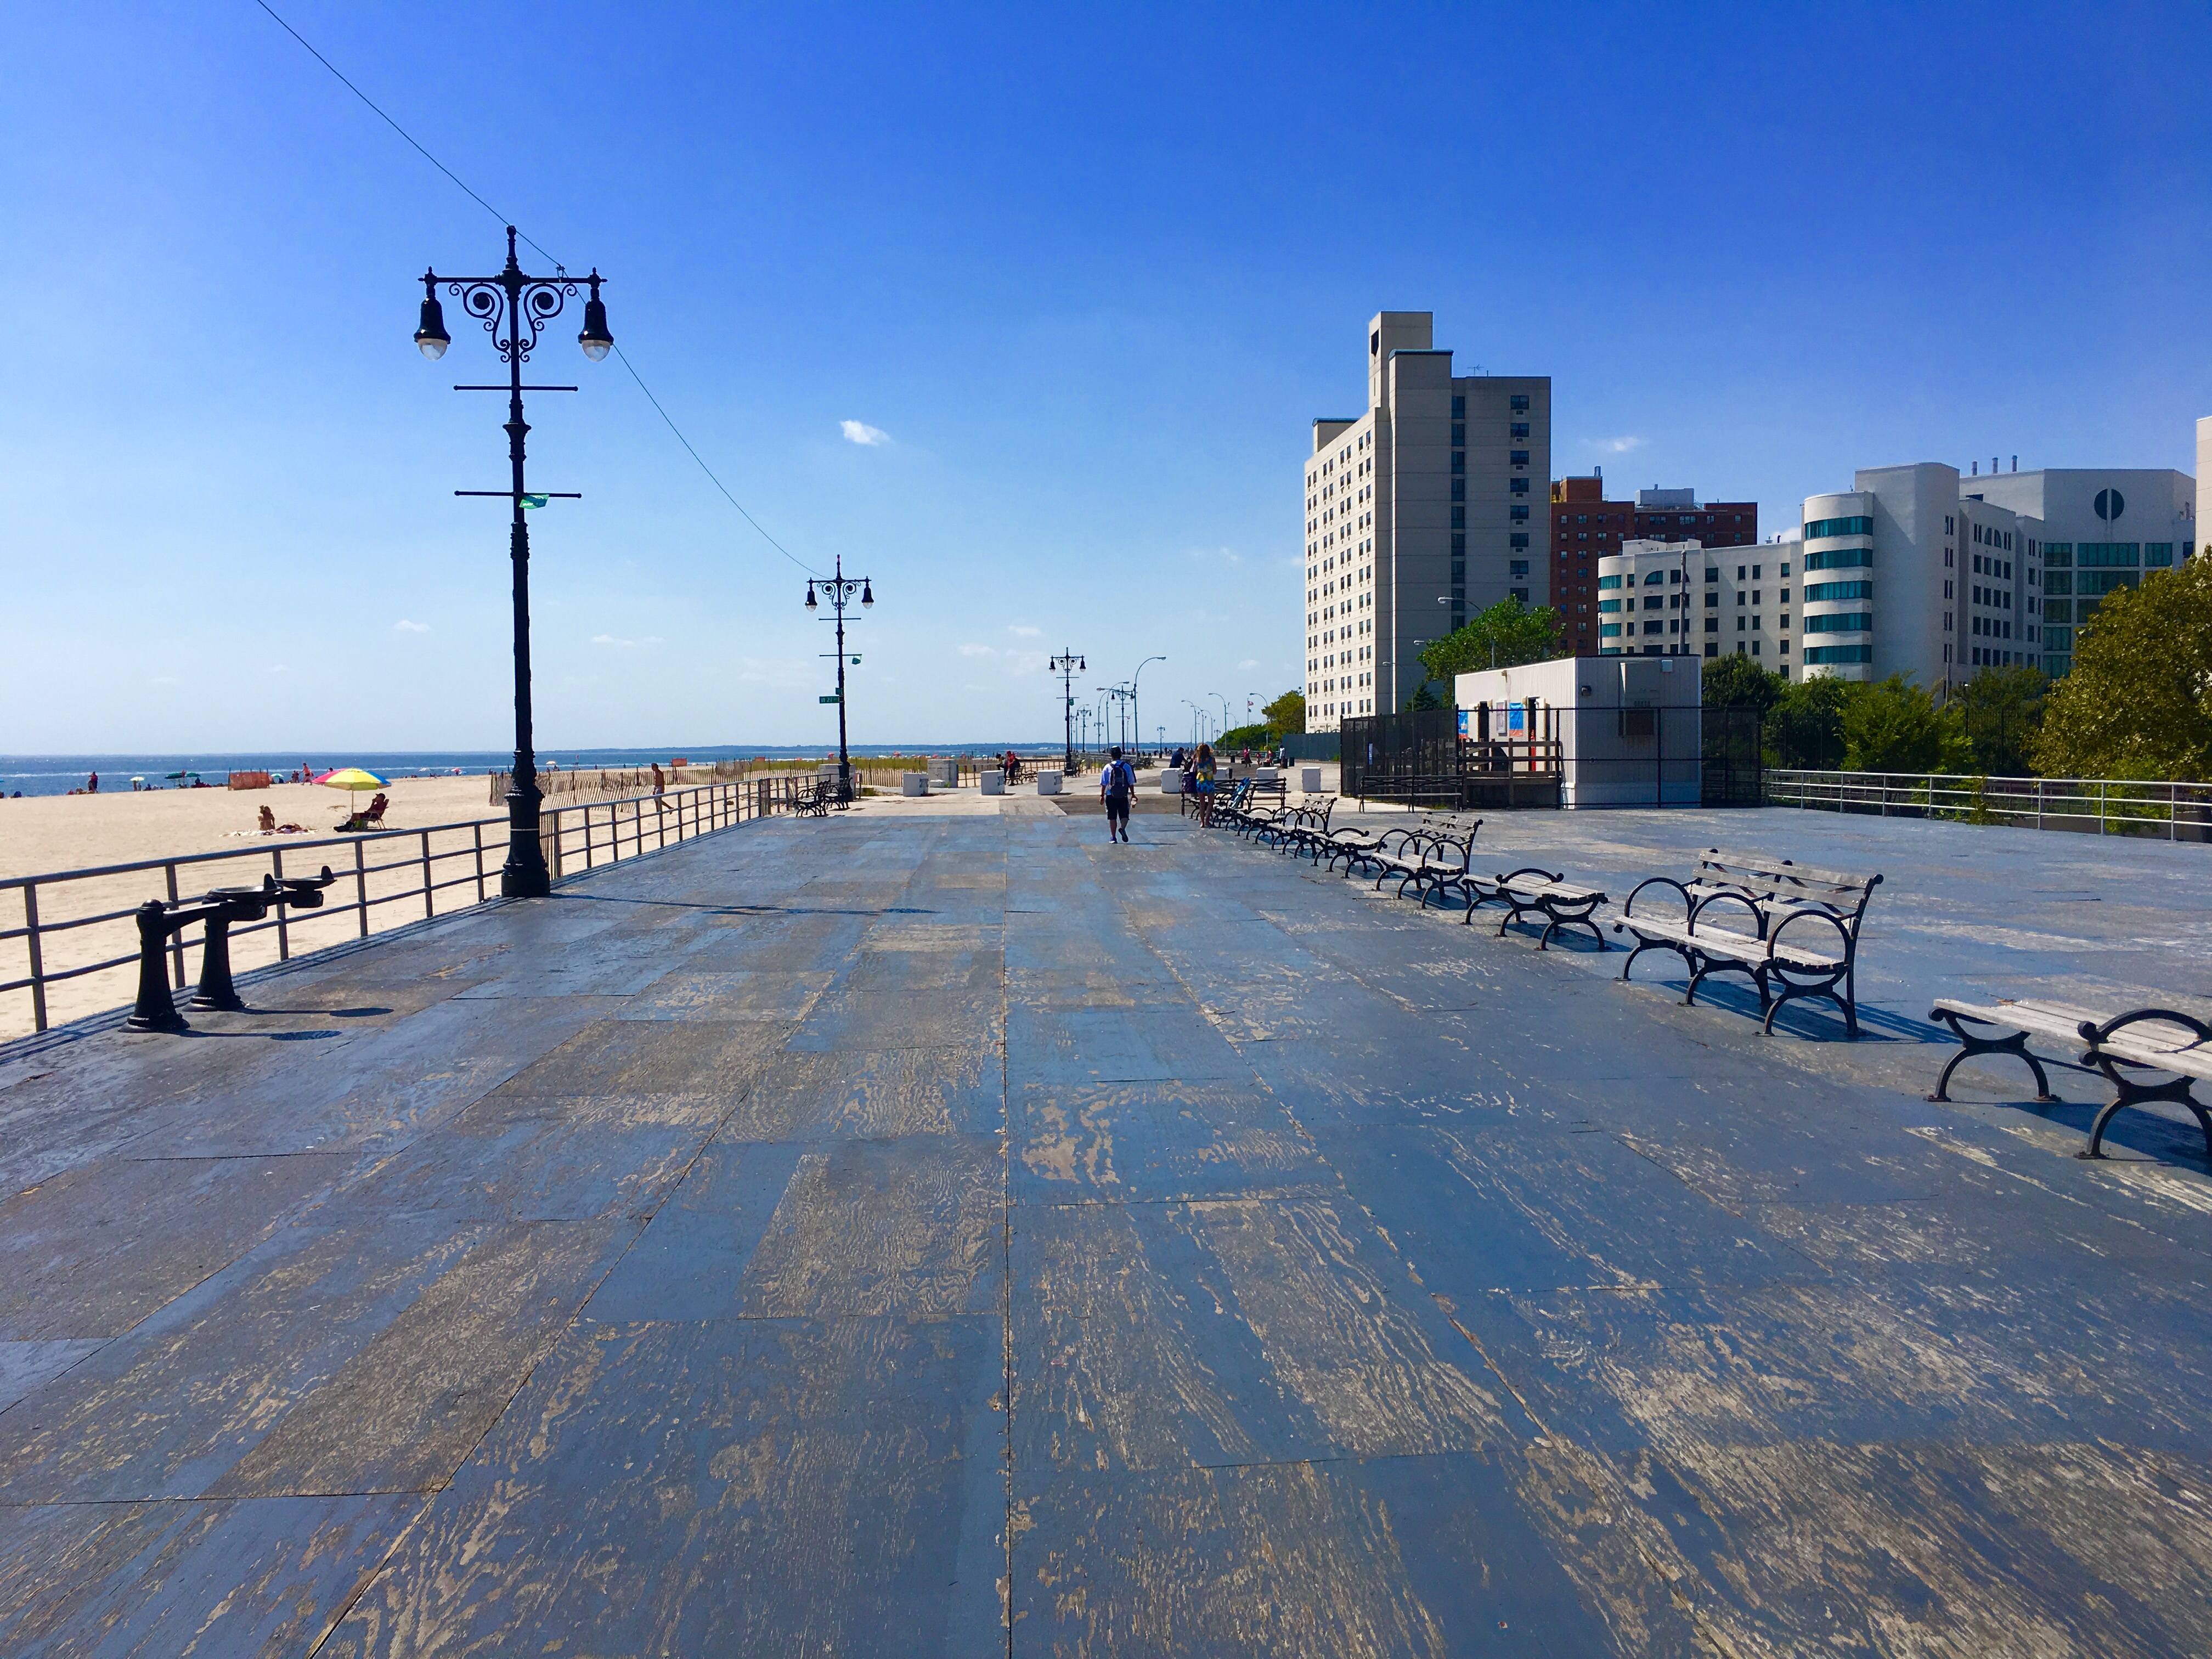 A few blocks away from Red Apple Group’s new apartment complex, a plywood deck stretches over the damaged Coney Island Boardwalk. Eagle photo by Lore Croghan